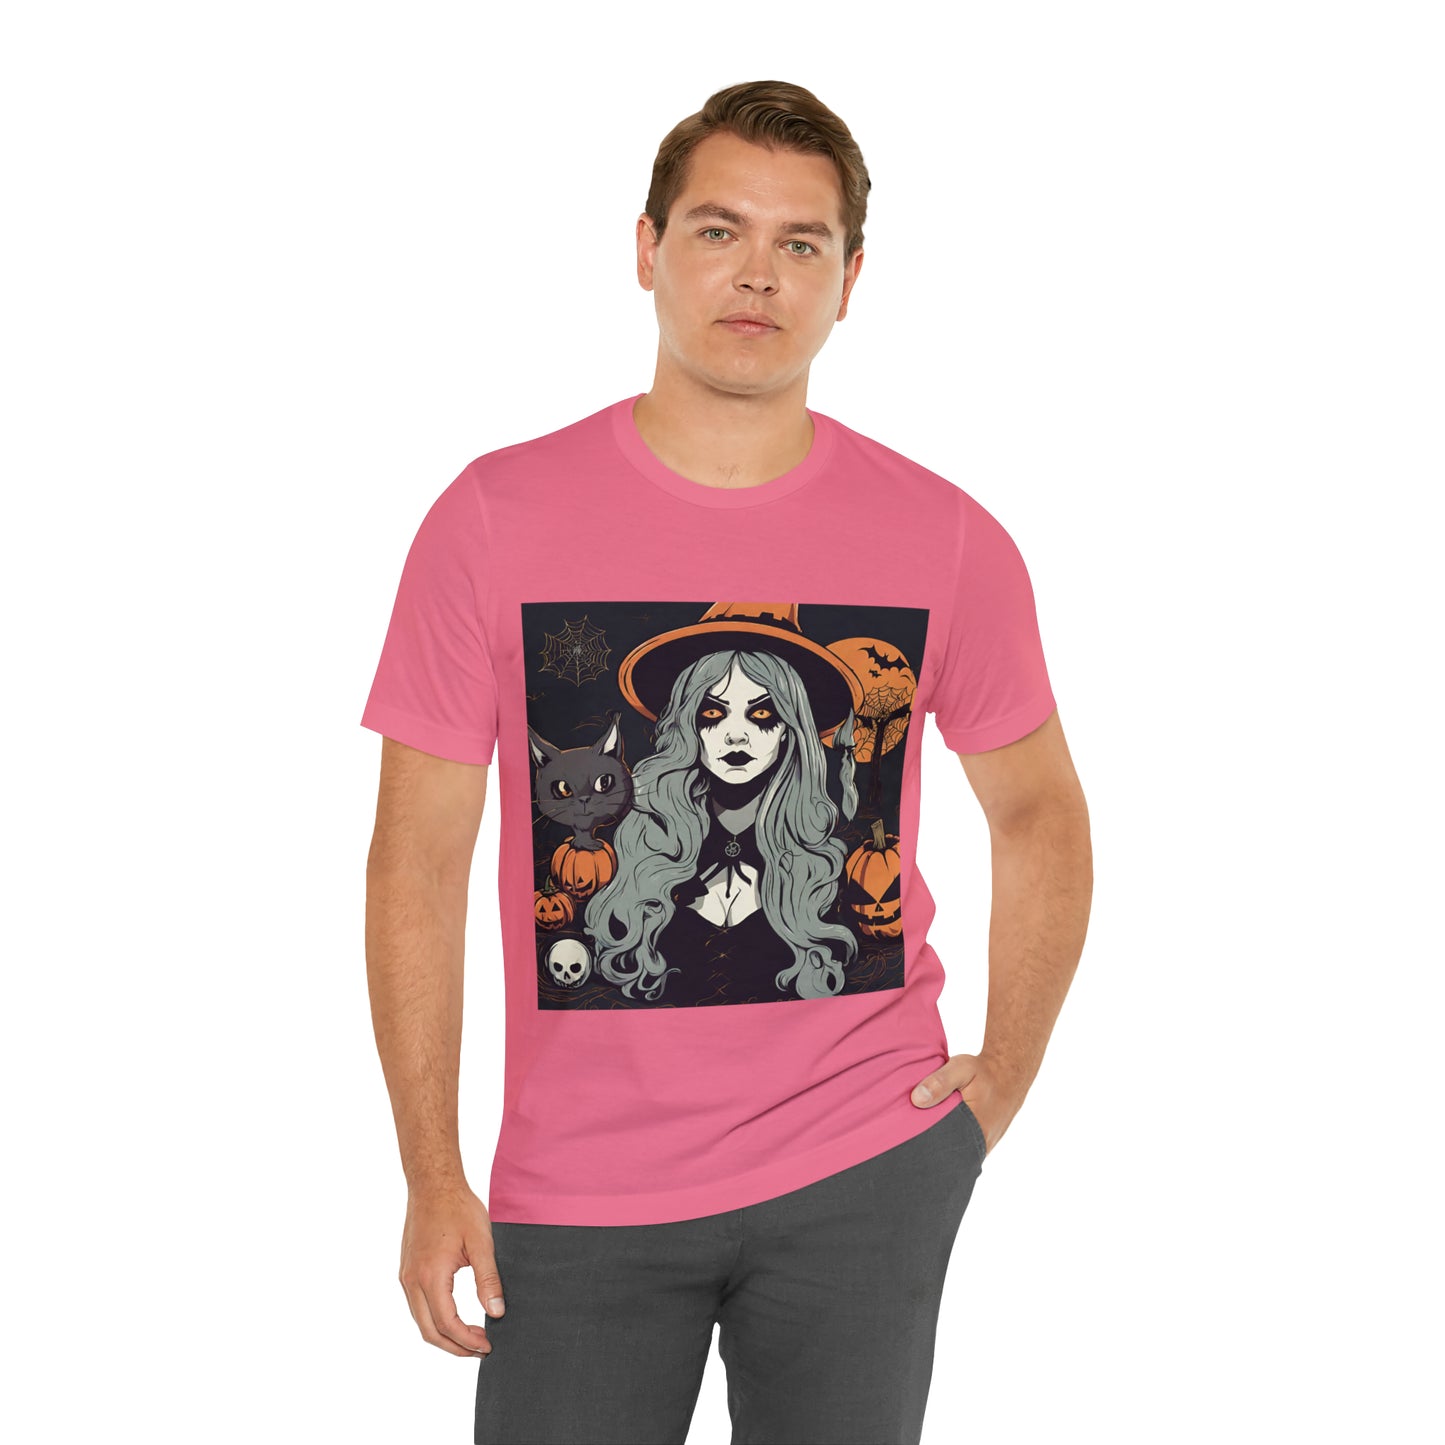 Halloween T-Shirt with Witch And a Spooky Cat T-Shirt | Halloween Gift Ideas T-Shirt Petrova Designs